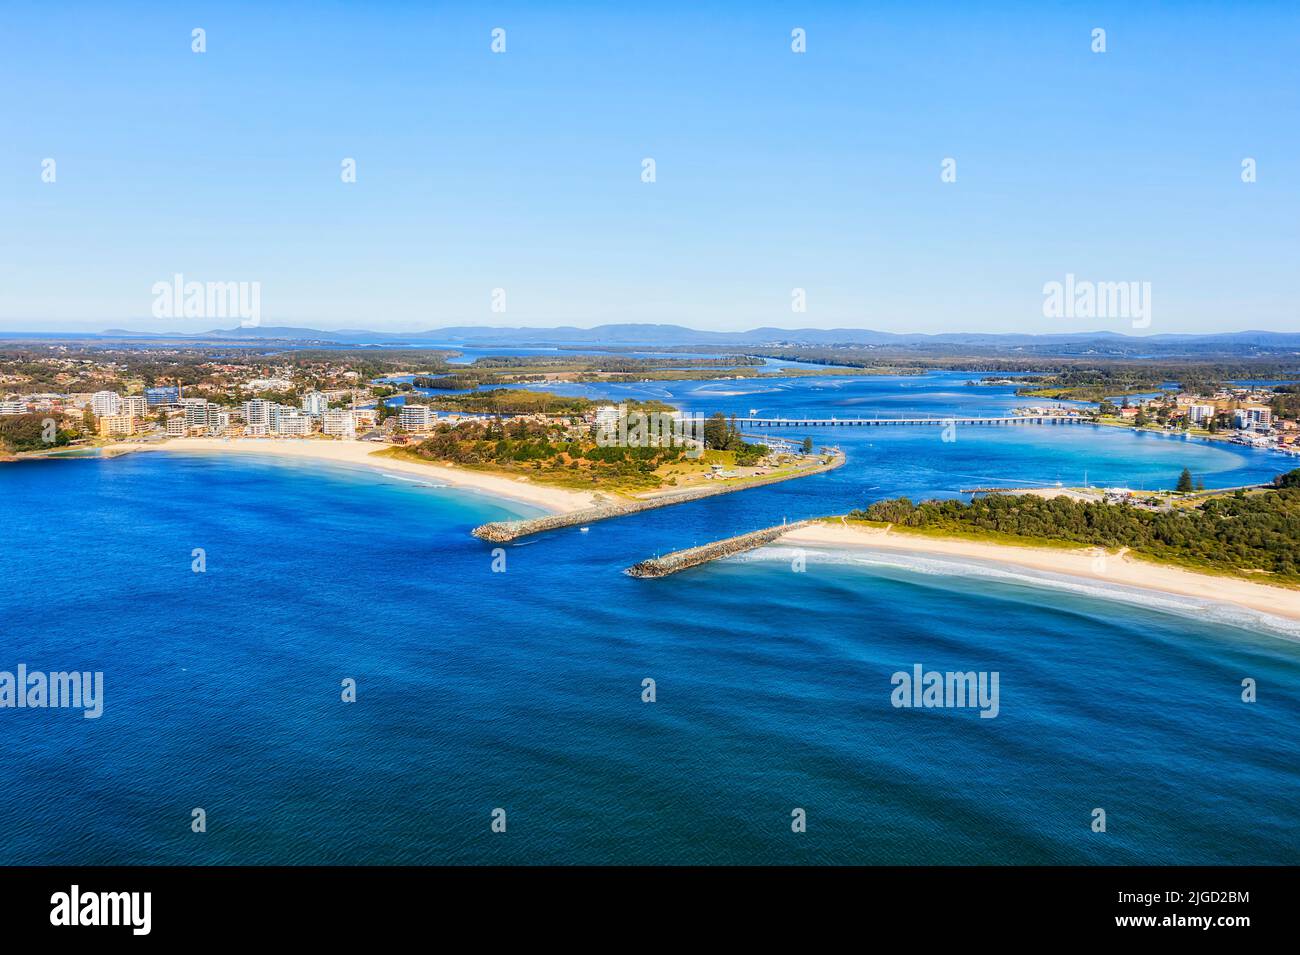 Aerial landscape view of the Entrance of Coolongolook river to Pacific ocean at Forster tuncurry towns in Australia. Stock Photo